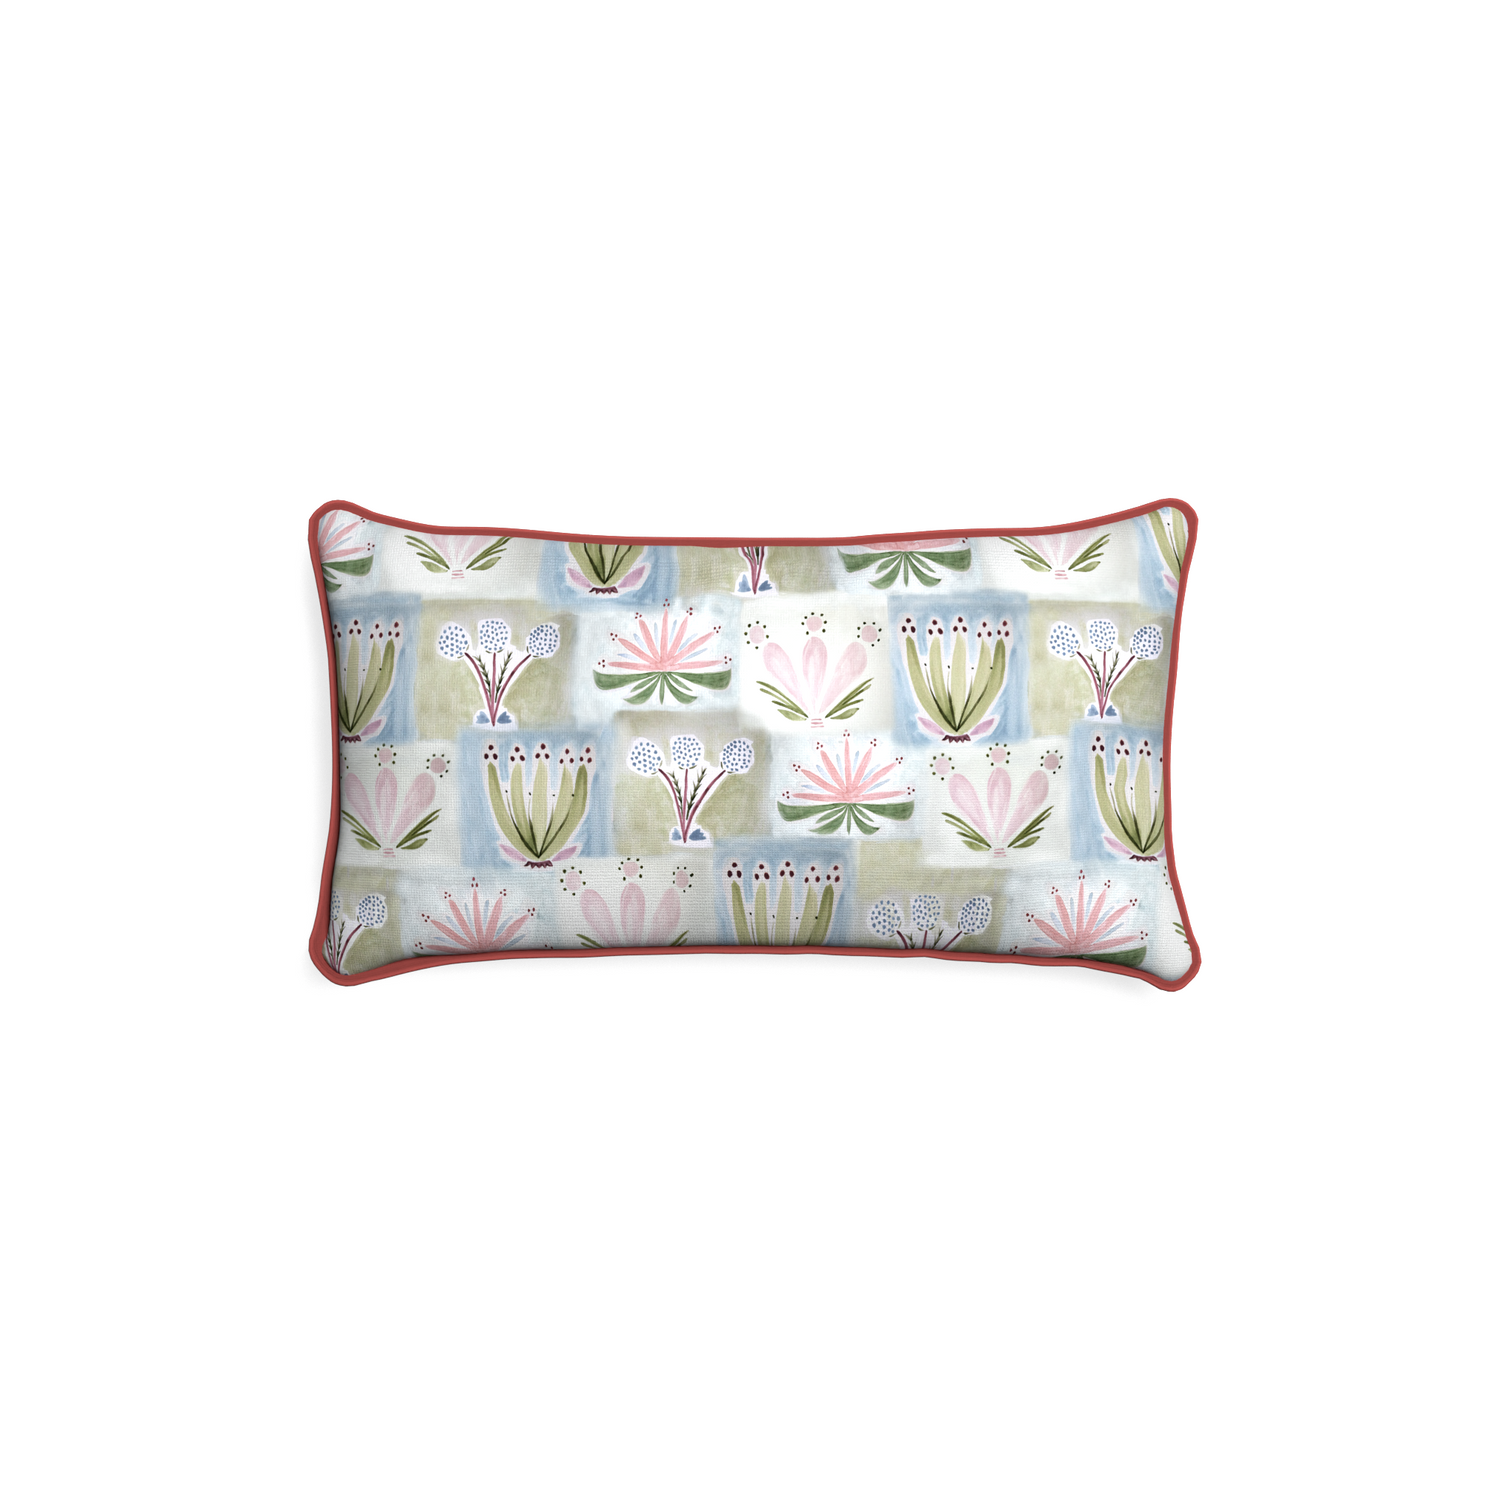 Petite-lumbar harper custom hand-painted floralpillow with c piping on white background